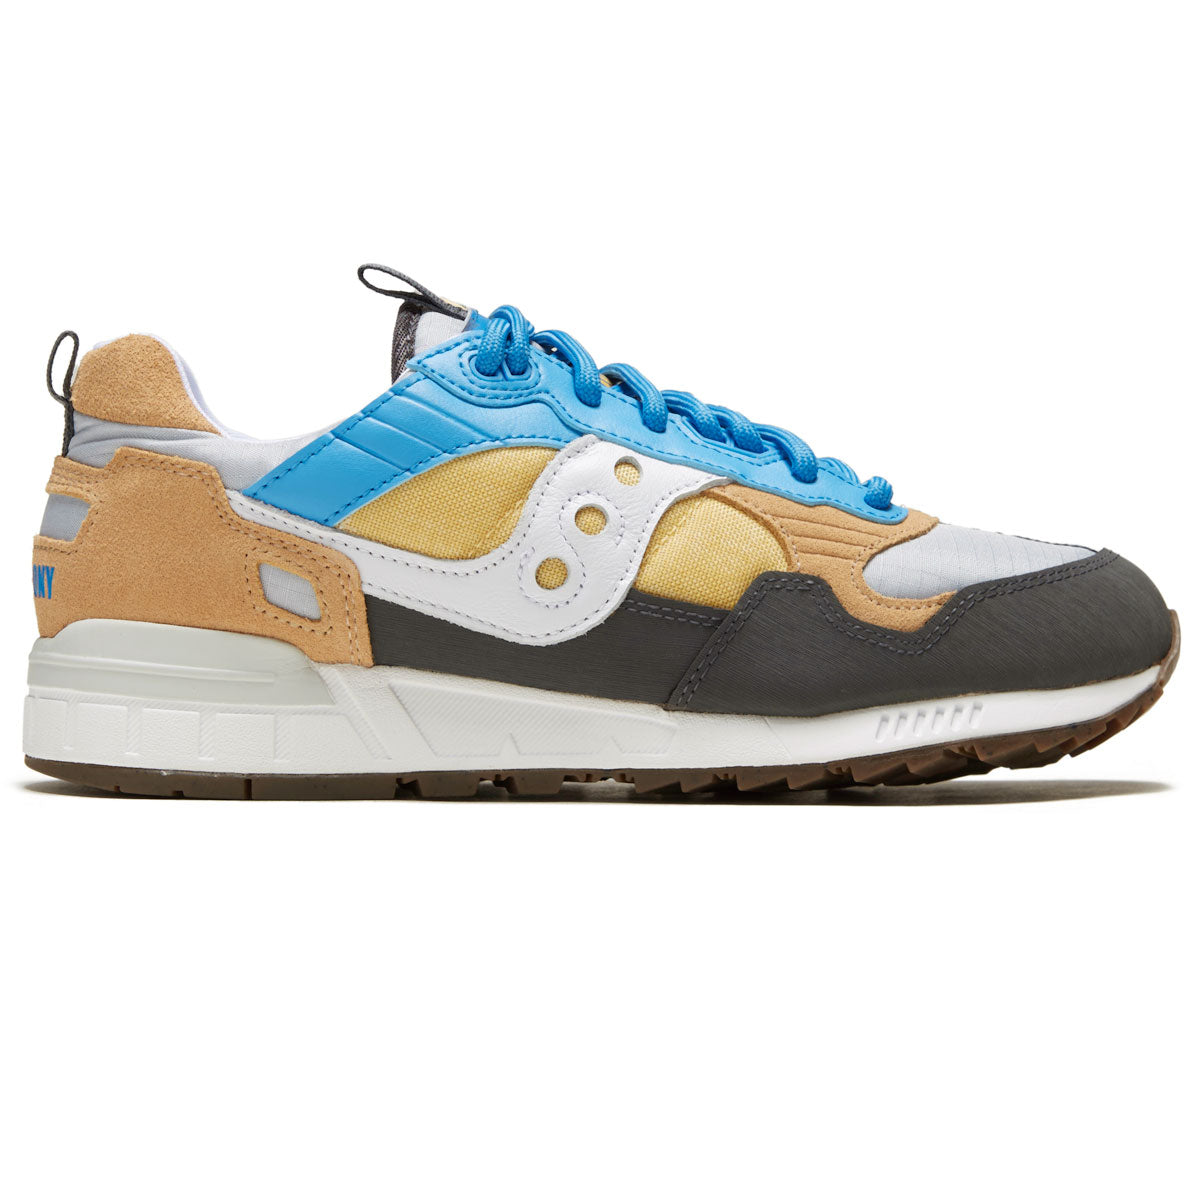 Saucony Shadow 5000 Shoes - Navy/Camel image 1